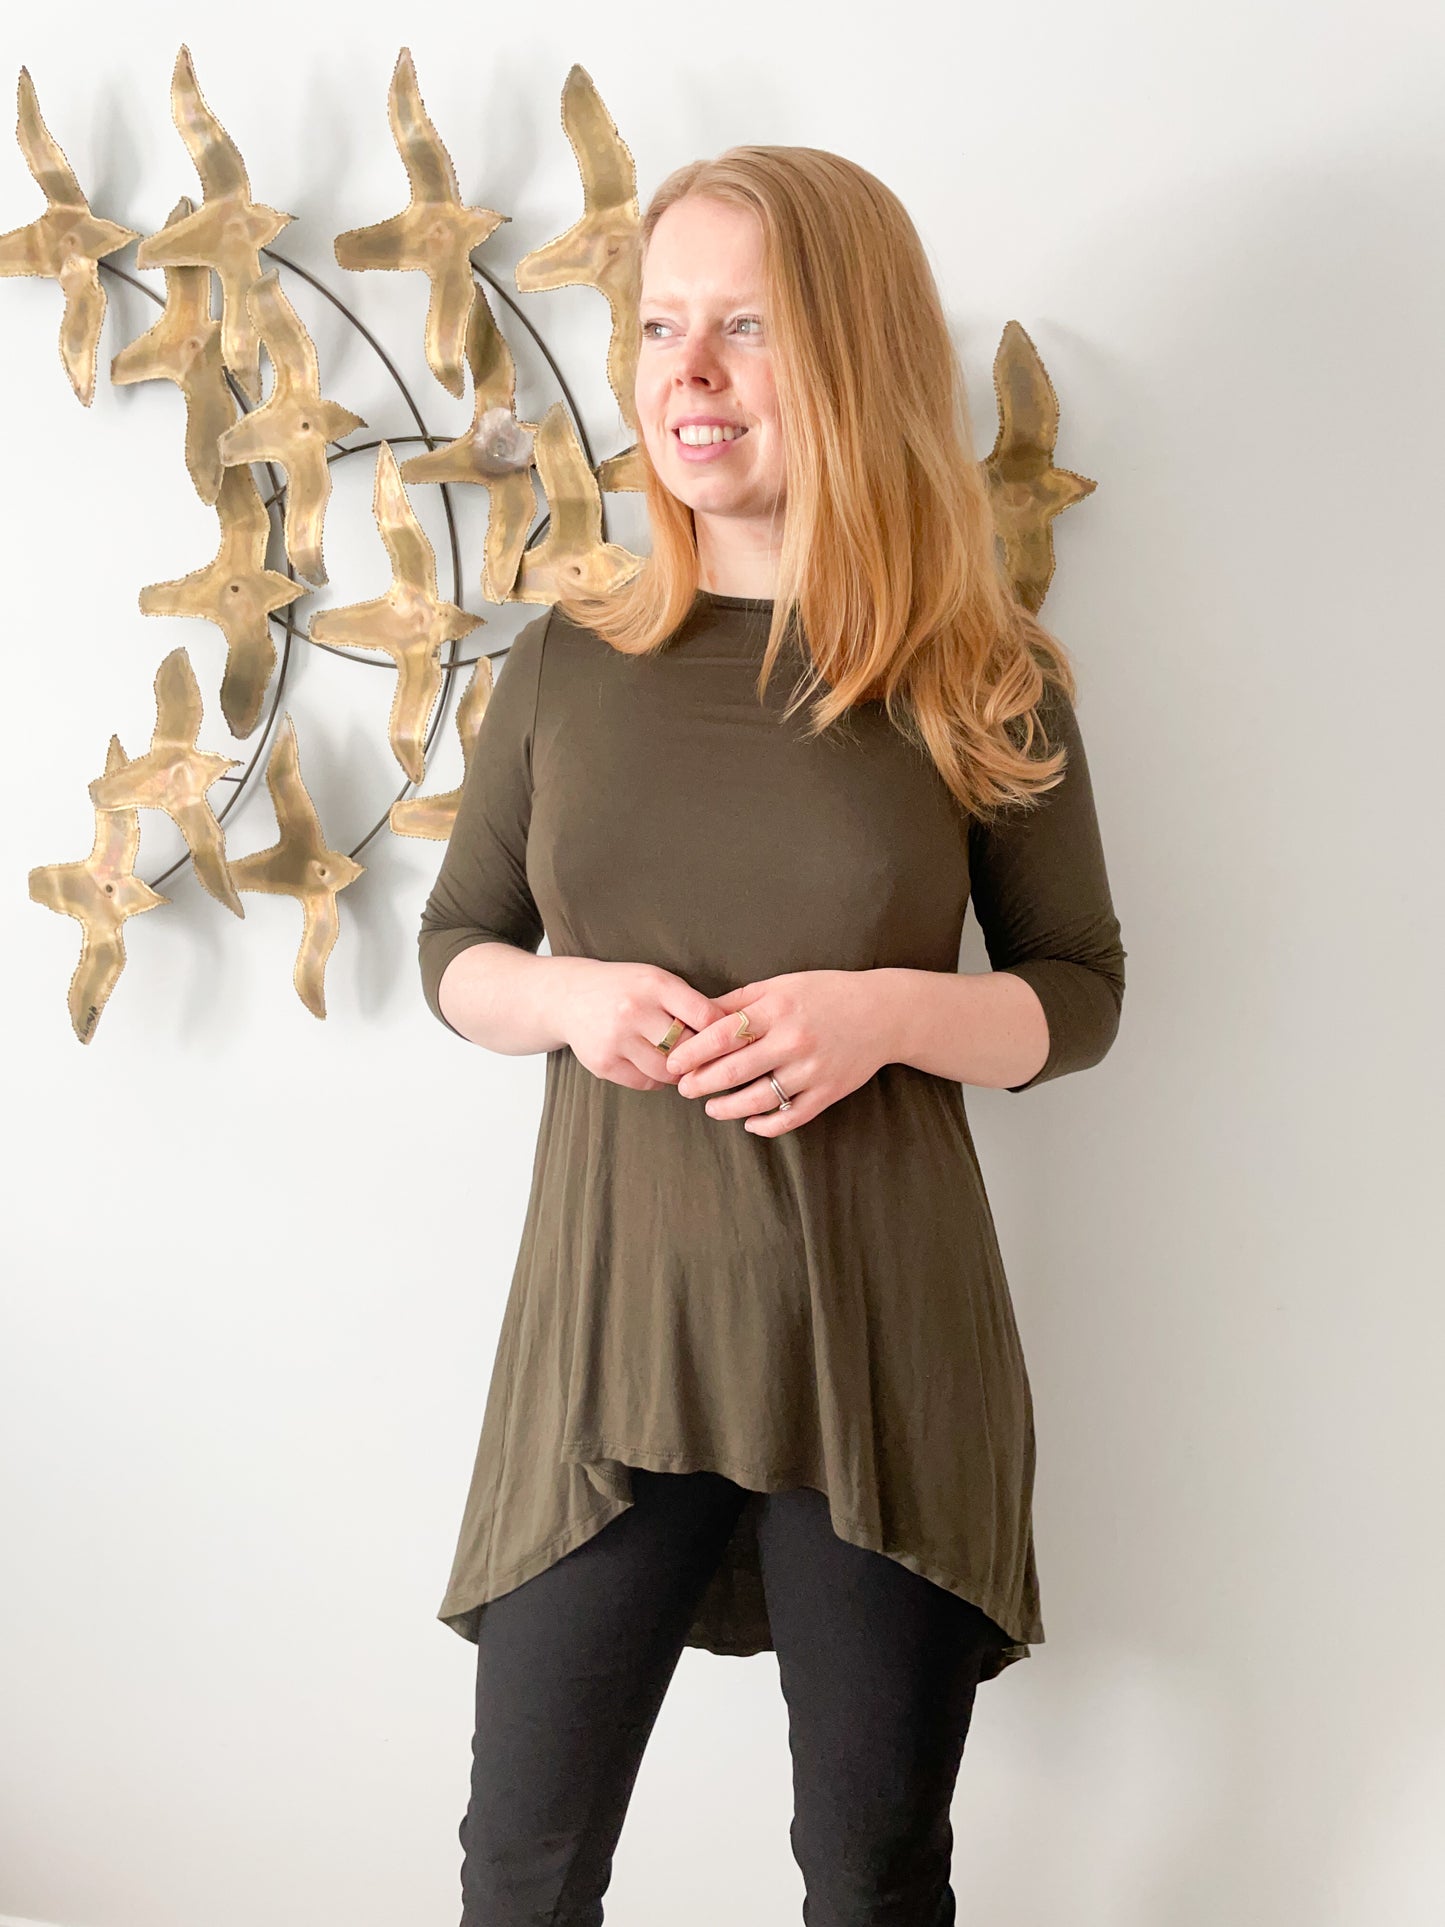 Olive Green Jersey Hi-Low 3/4 Sleeve Tunic Top - XS/S